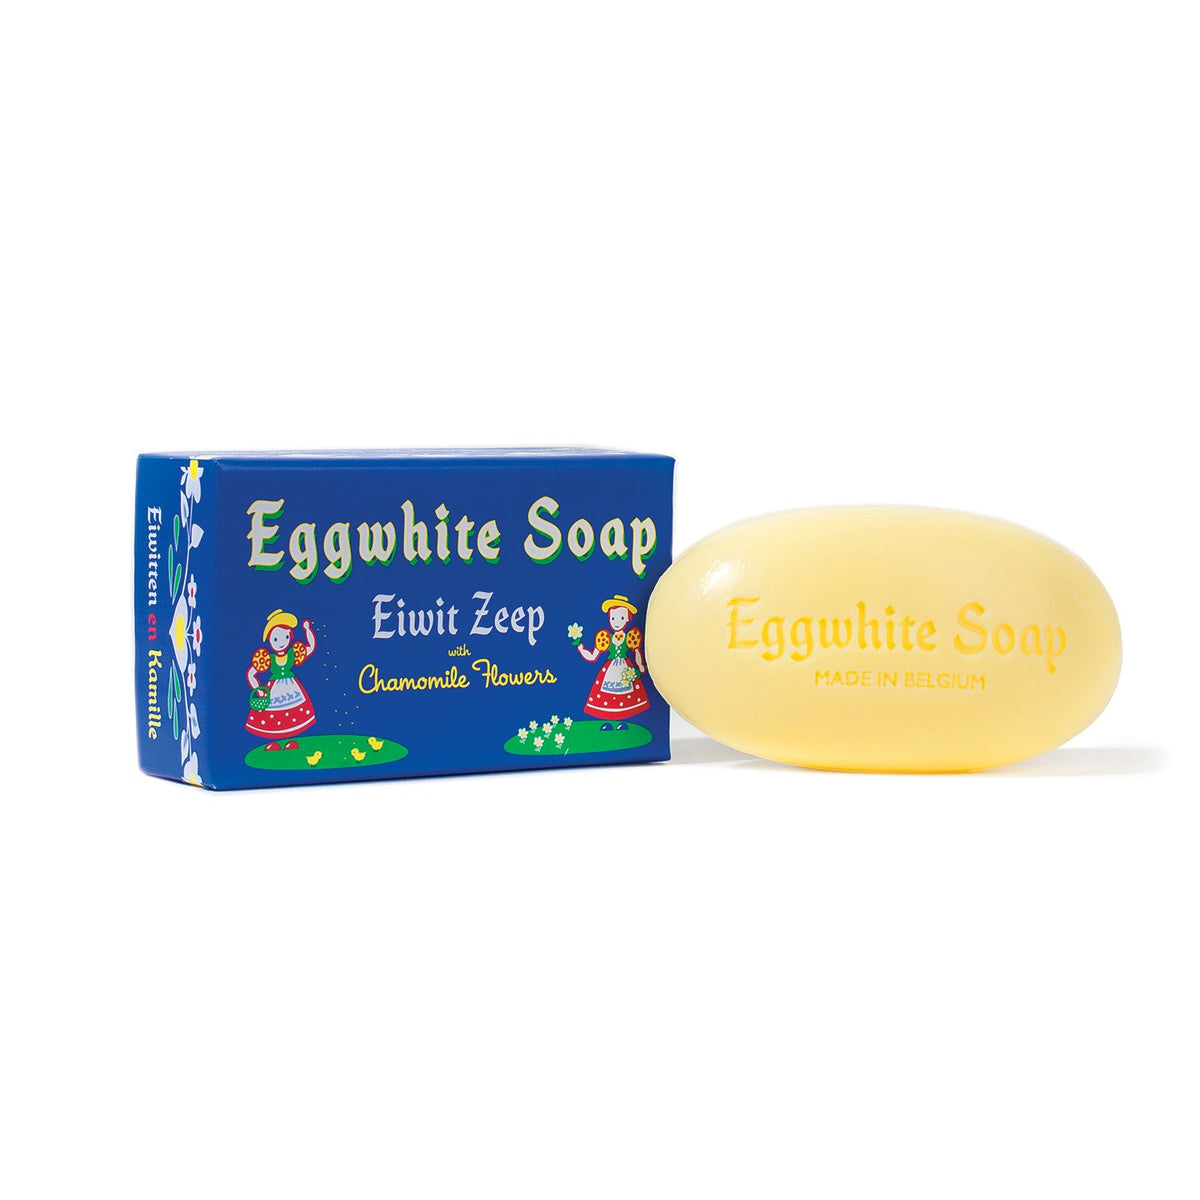 A bar of Eggwhite Facial Single Soap - Belgium from Soaps & Soaks From Around The World next to its blue packaging, which features illustrations of women in traditional dresses and the text “eggwhite soap” and “eiwit zeep chamomile flower oil.”